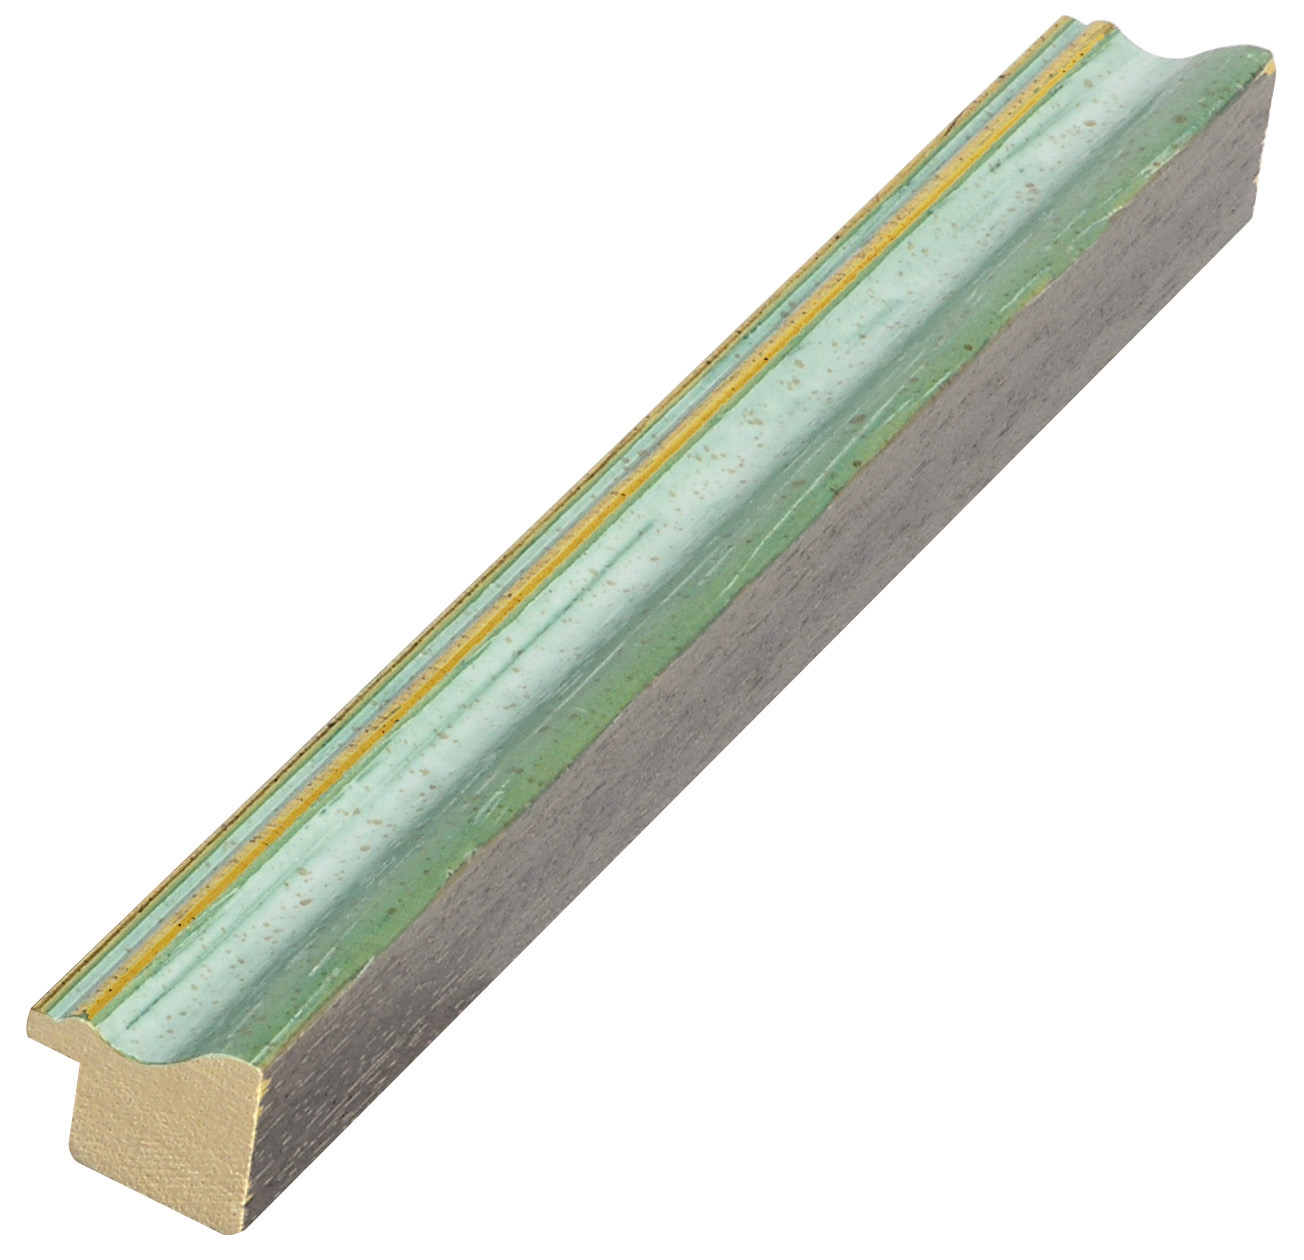 Moulding ayous jointed width 25mm - matt green with gold edge